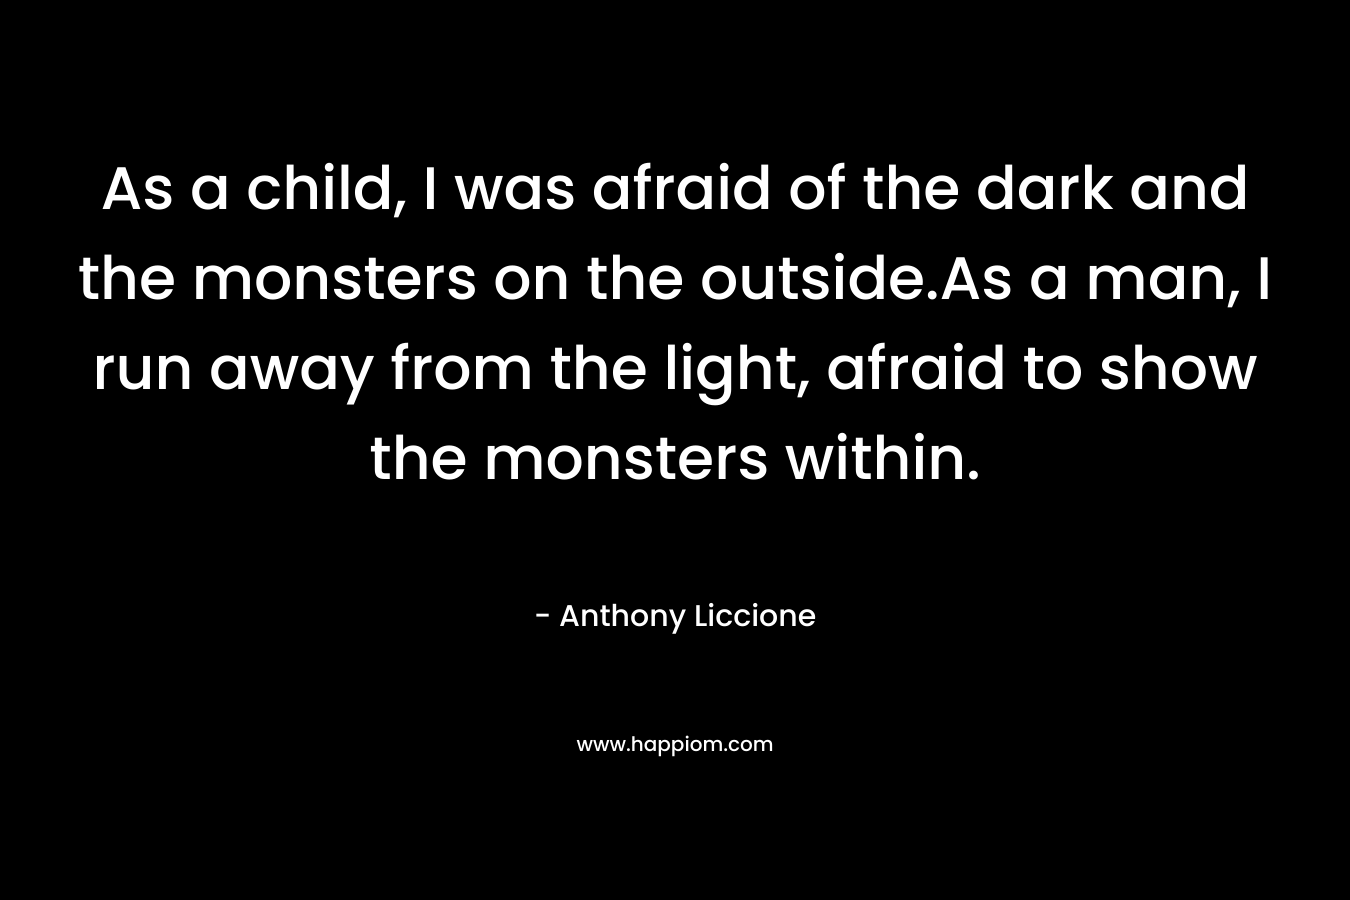 As a child, I was afraid of the dark and the monsters on the outside.As a man, I run away from the light, afraid to show the monsters within.